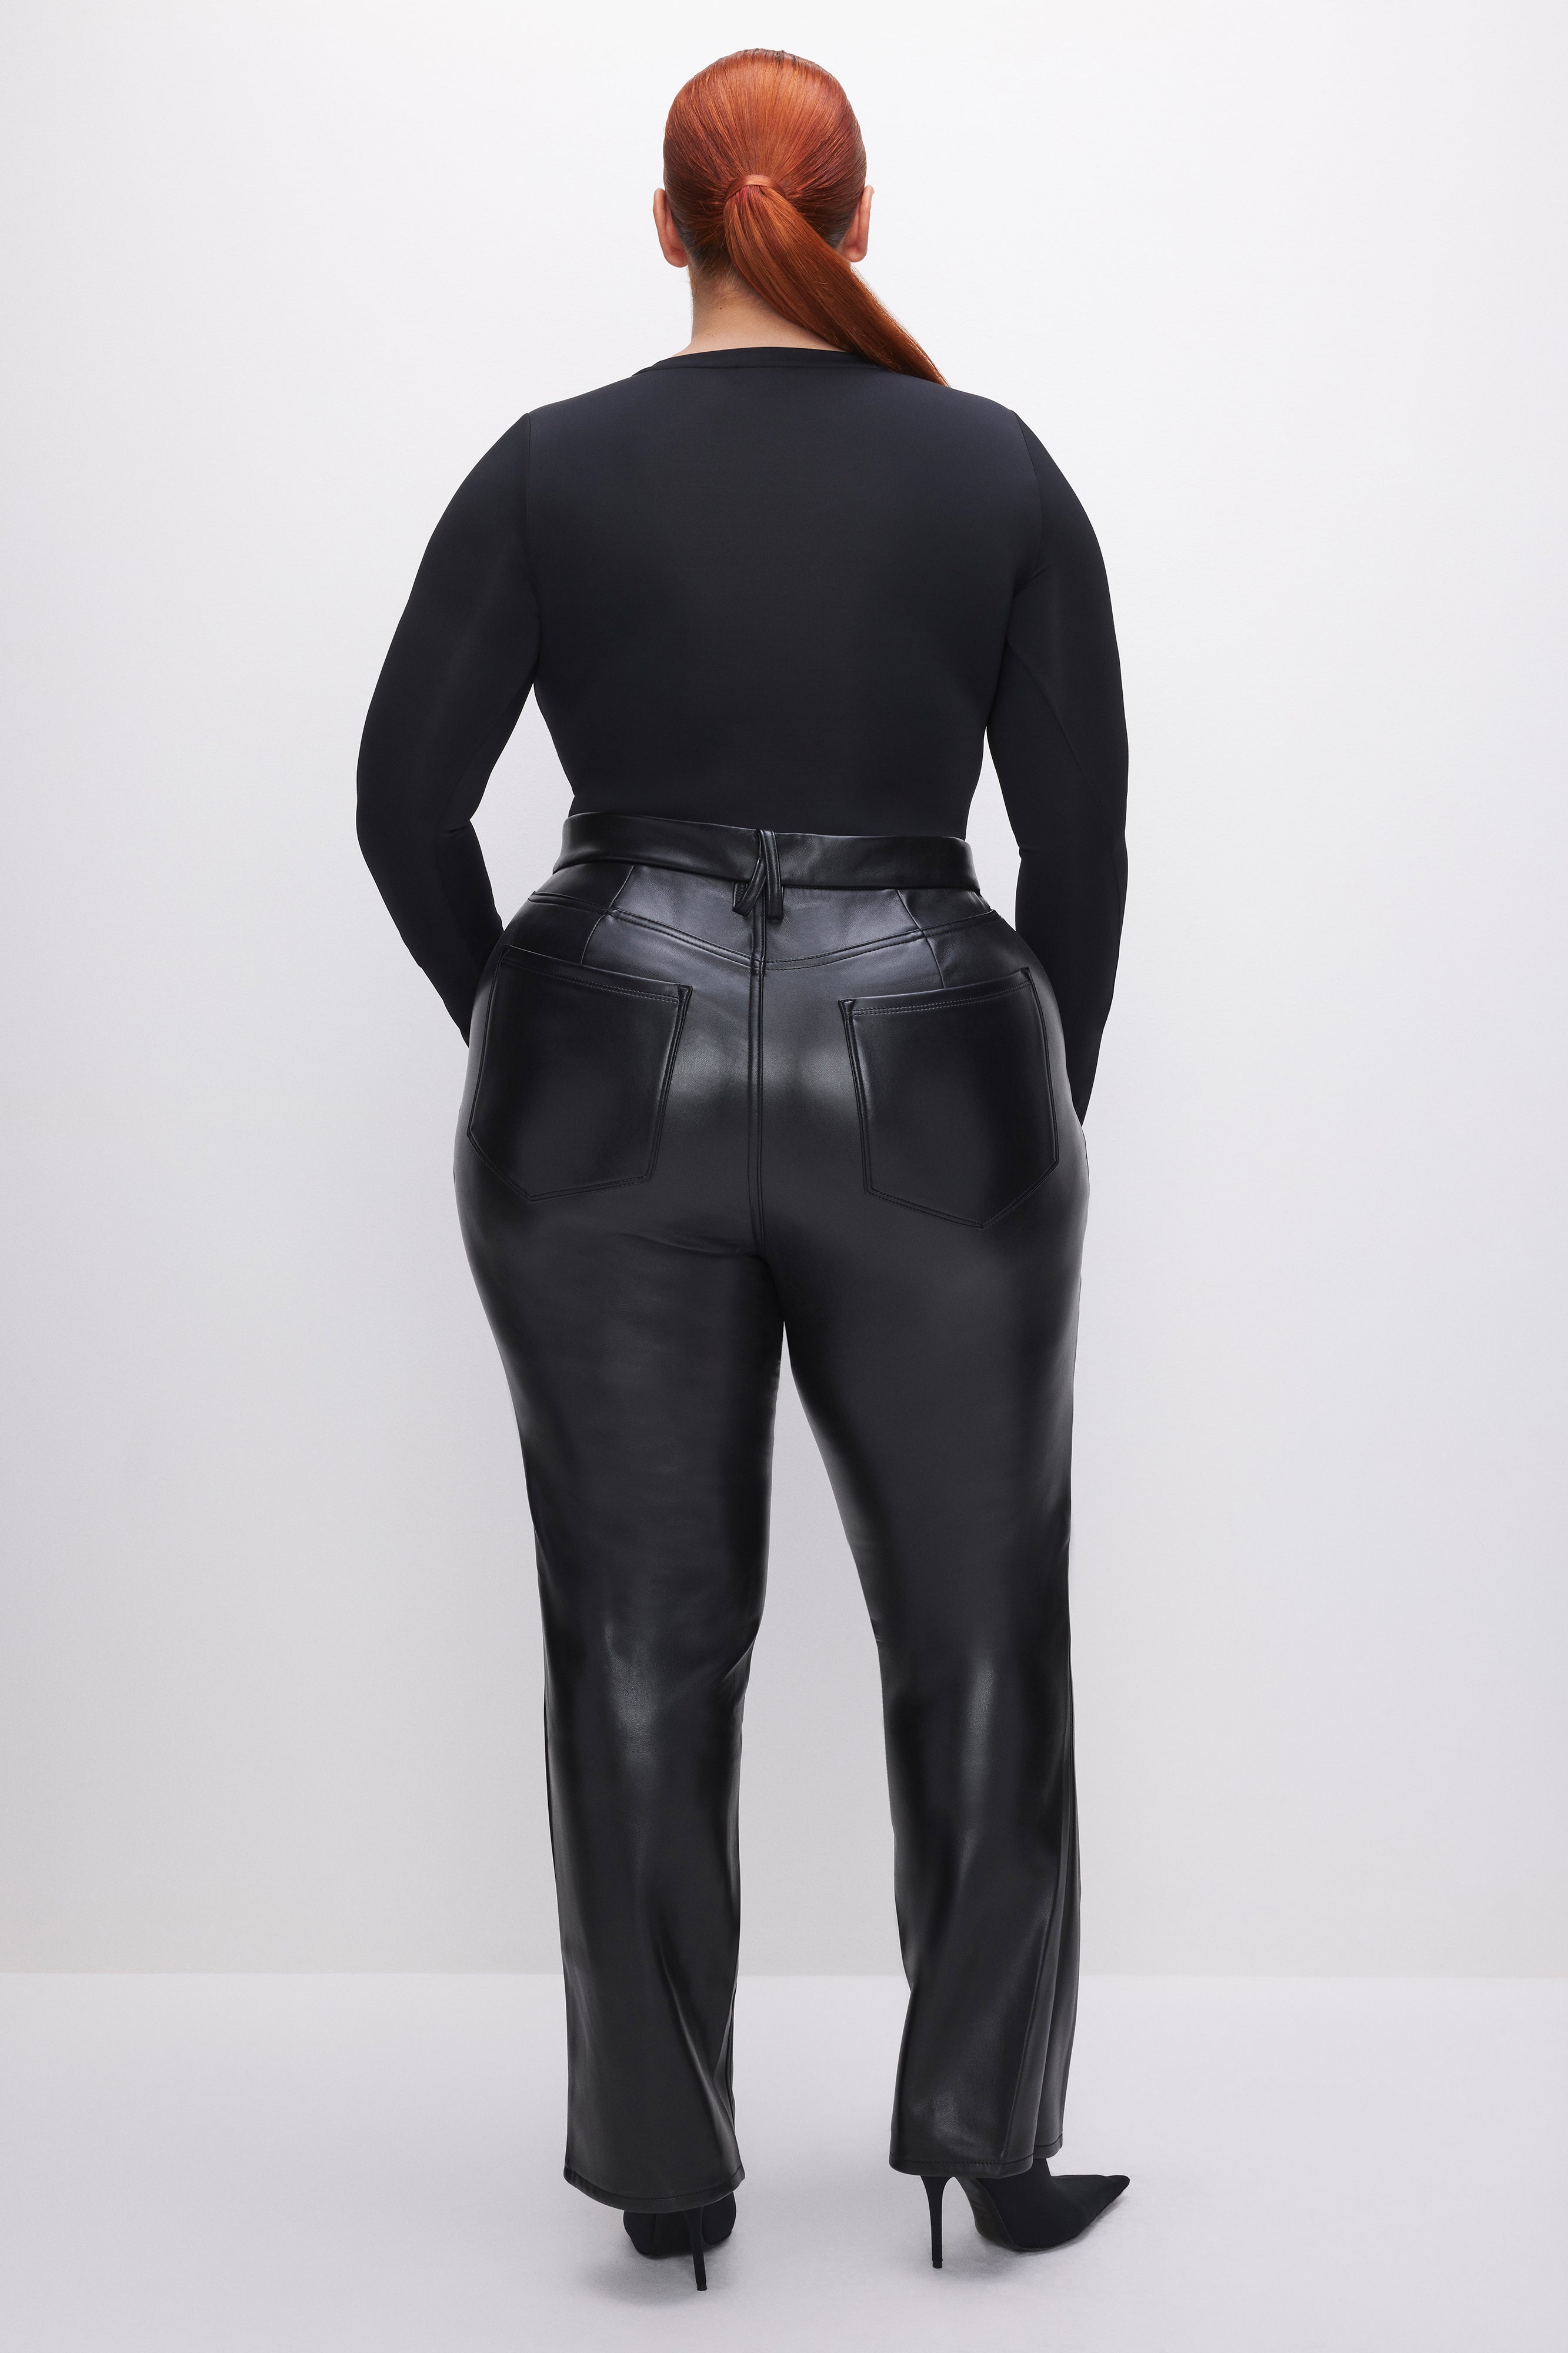 GOOD ICON FAUX LEATHER PANTS